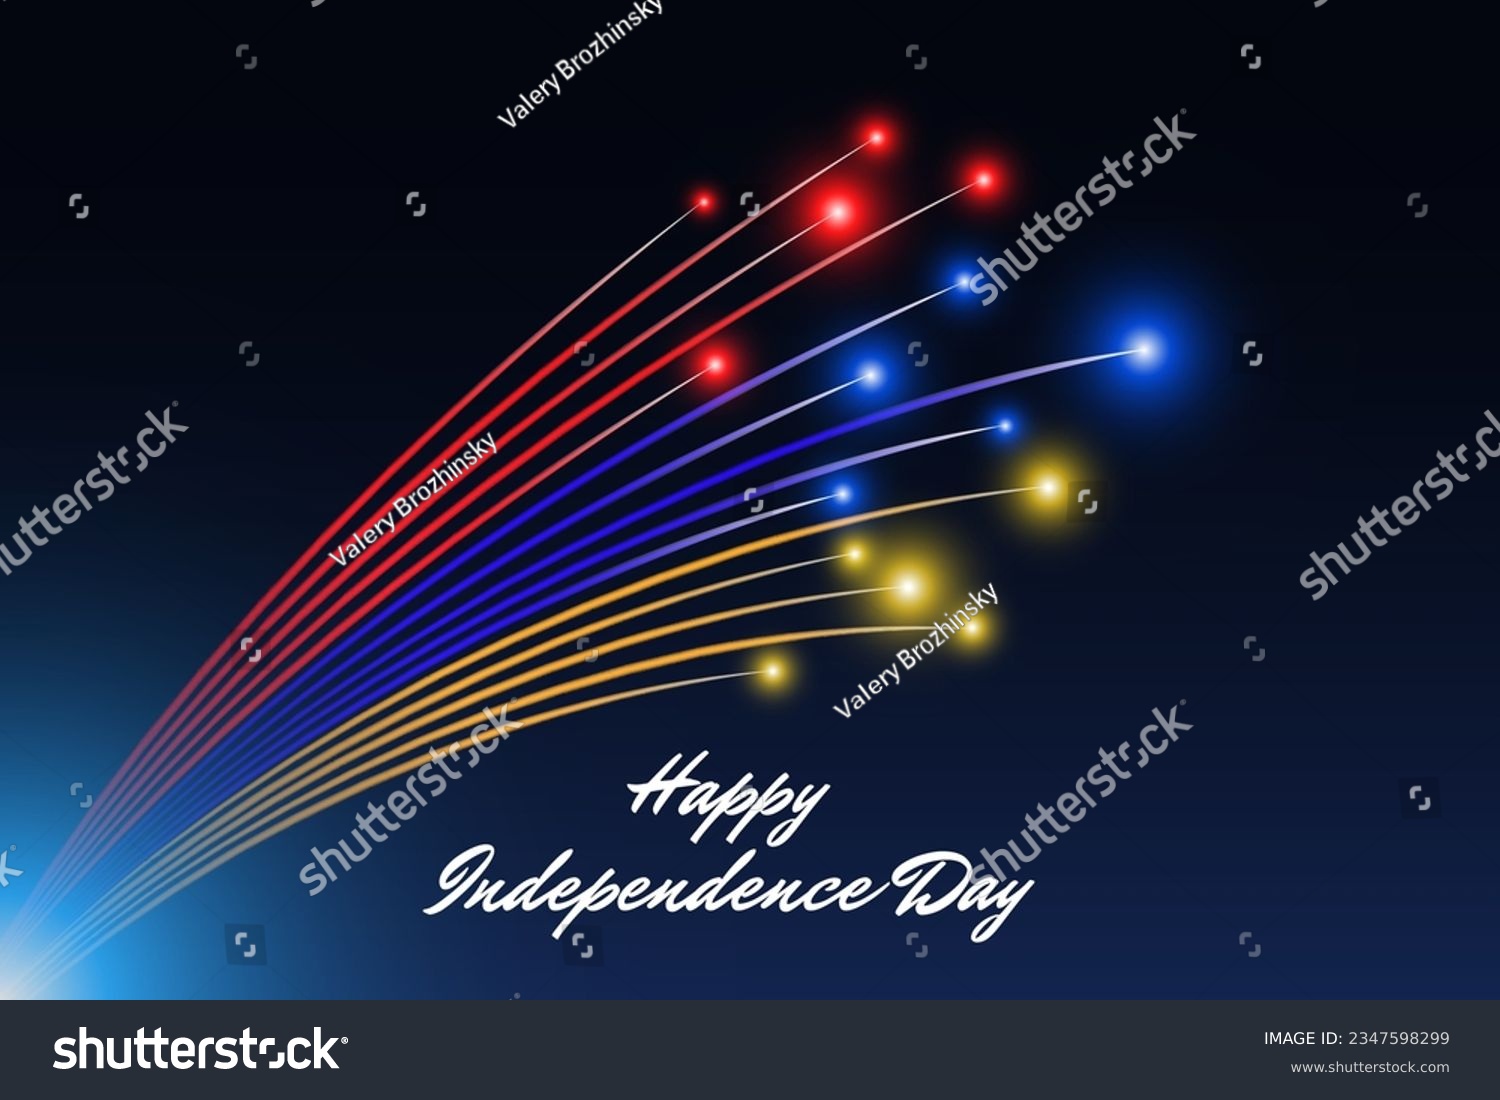 SVG of September 21, armenia independence day, armenian colorful fireworks flag on blue night sky background. Greeting card. Armenia national holiday september 21st. Vector. Independence day card svg